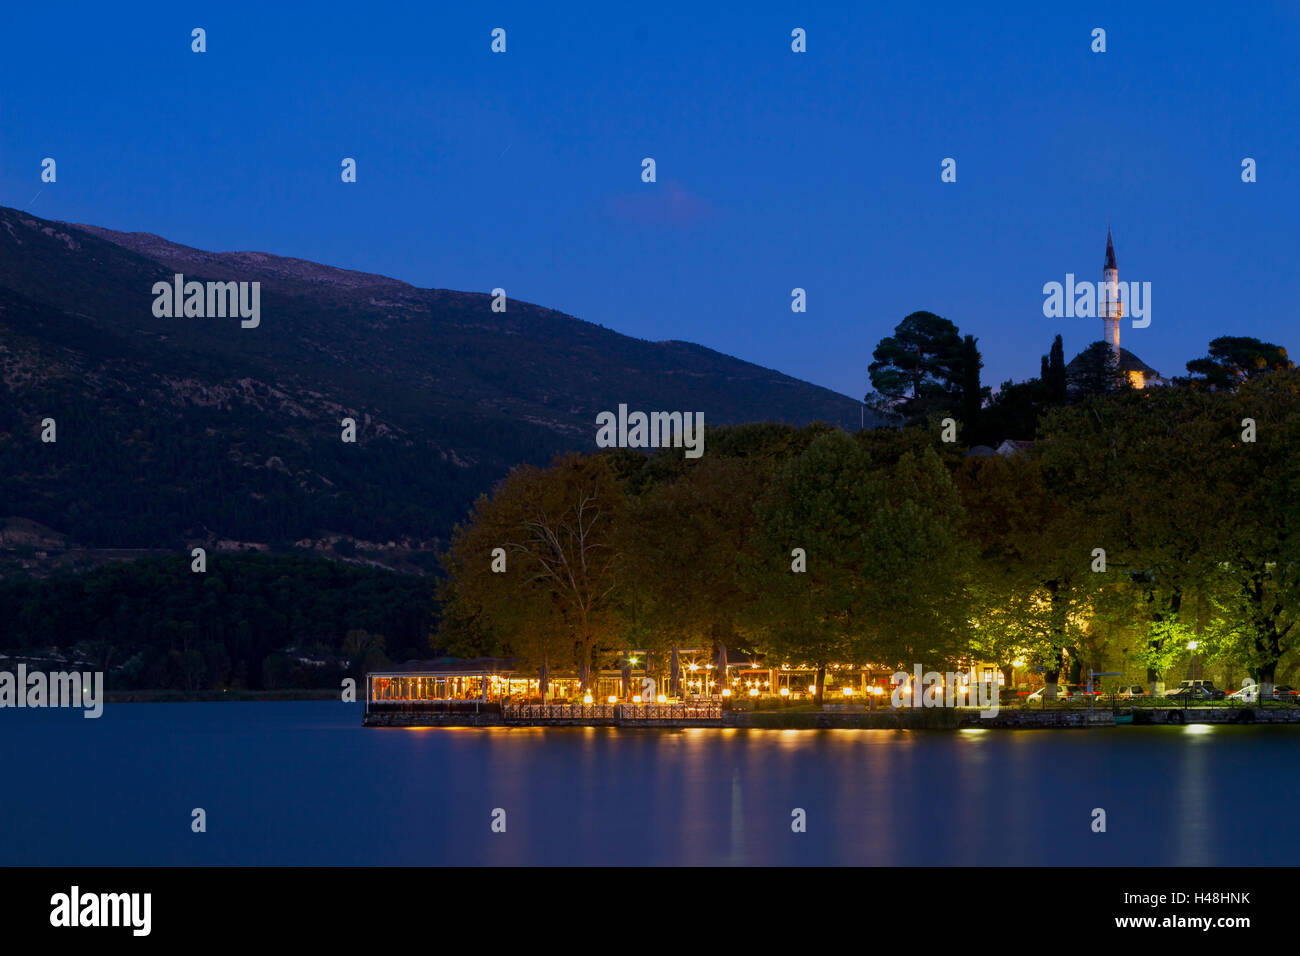 Partial view of the town of Ioannina, in Epirus region, Greece. Stock Photo